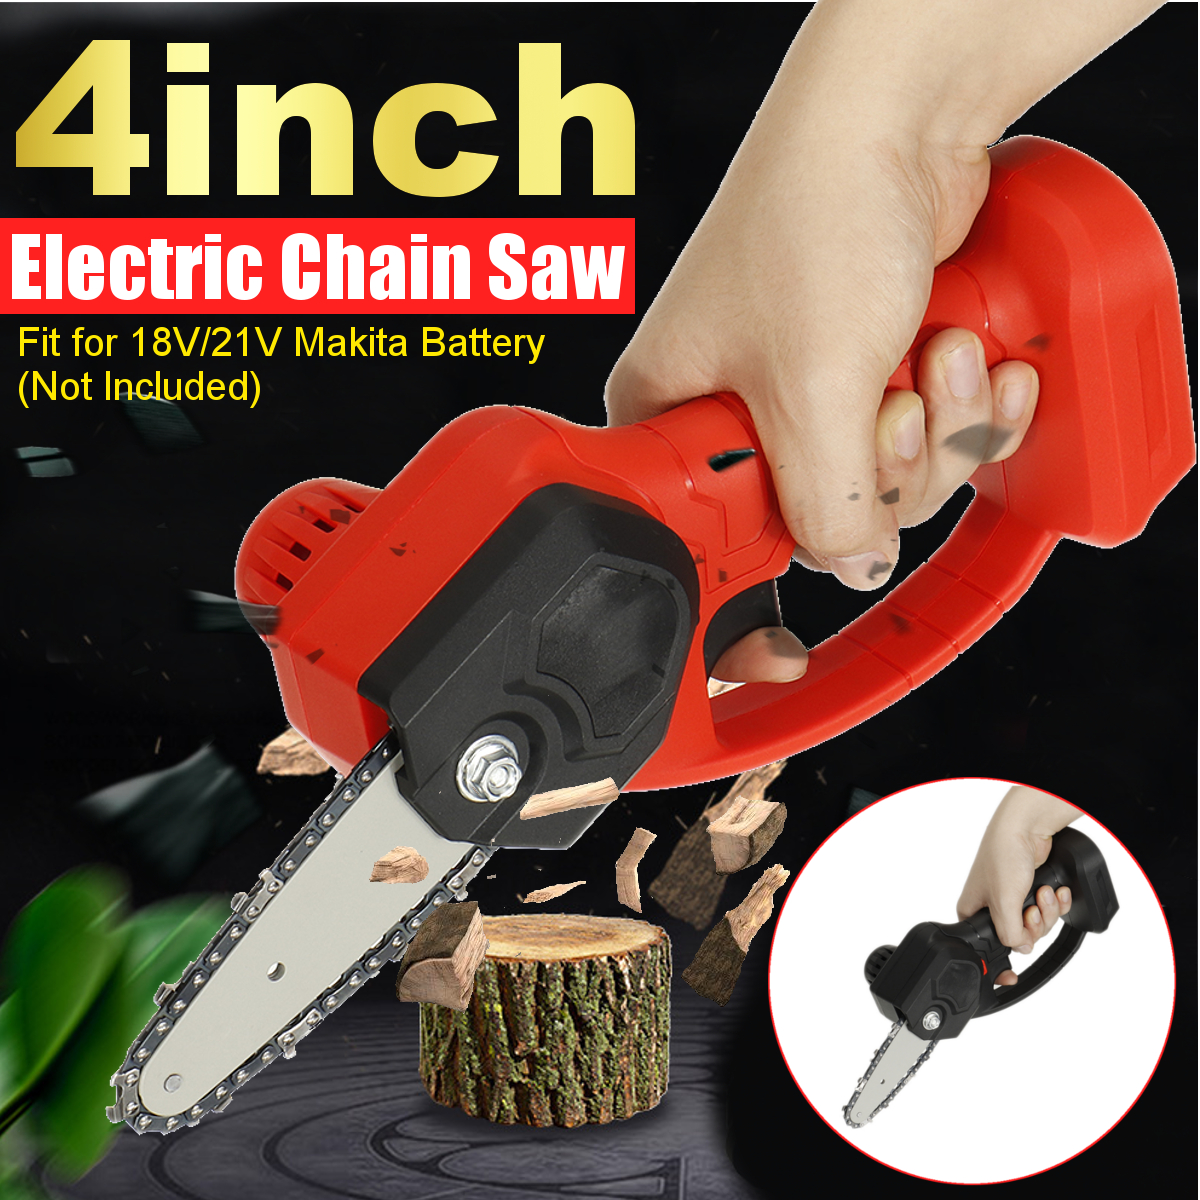 550W-4-Mini-Cordless-One-Hand-Saw-Woodworking-Electric-Chain-Saw-Wood-Cutter-For-Makita-18V21V-Batte-1784797-2